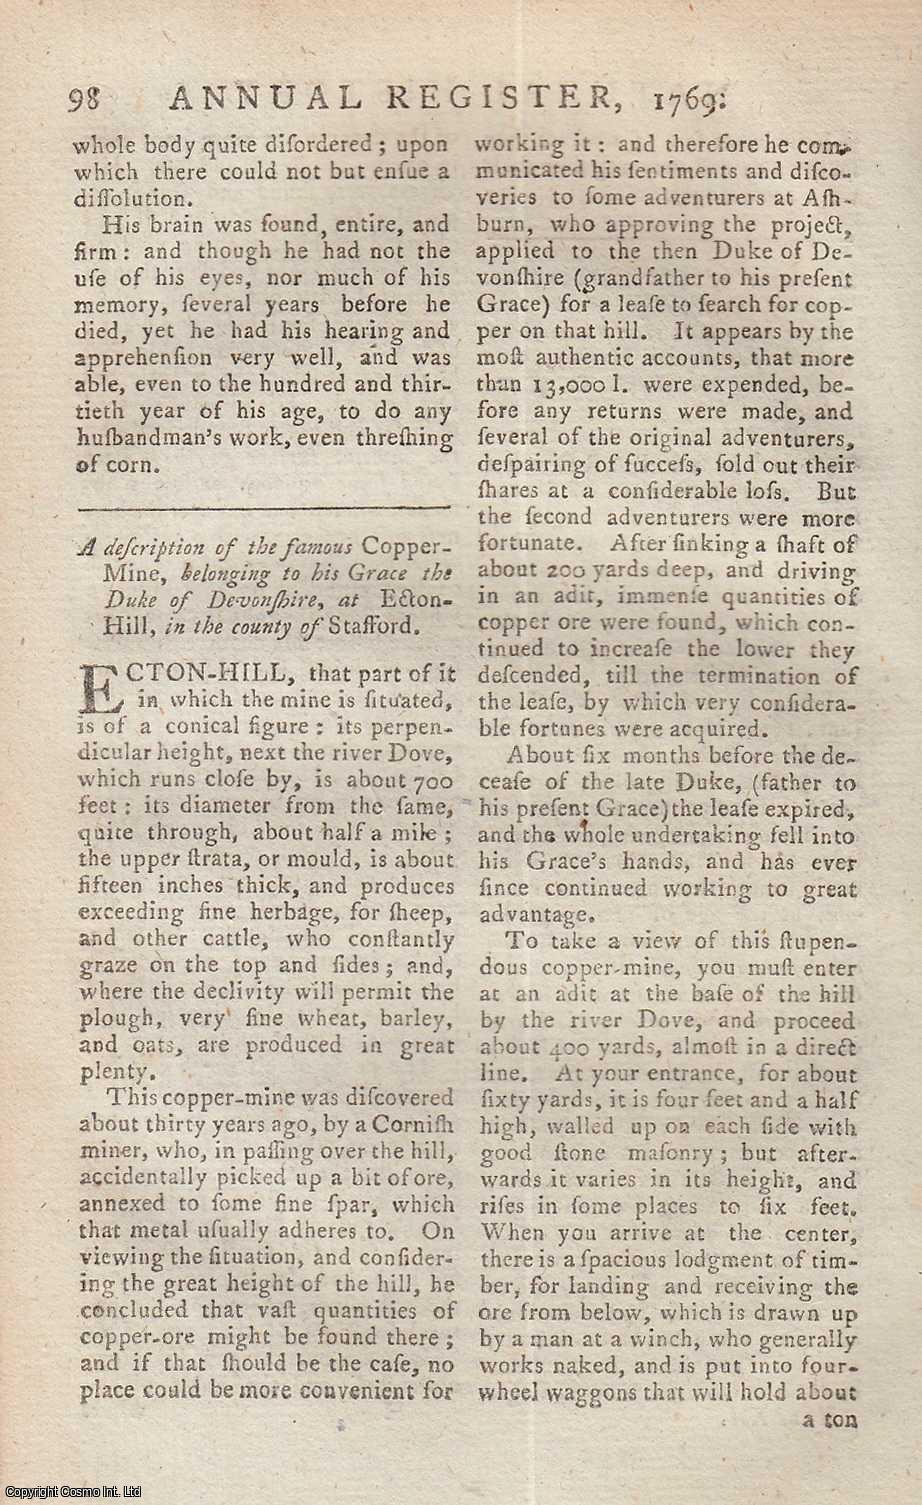 Efford, William - A description of the famous Copper-Mine, belonging to his Grace, the Duke of Devonshire, at Ecton-Hill, in the county of Stafford. An original article from The Annual Register for 1769.